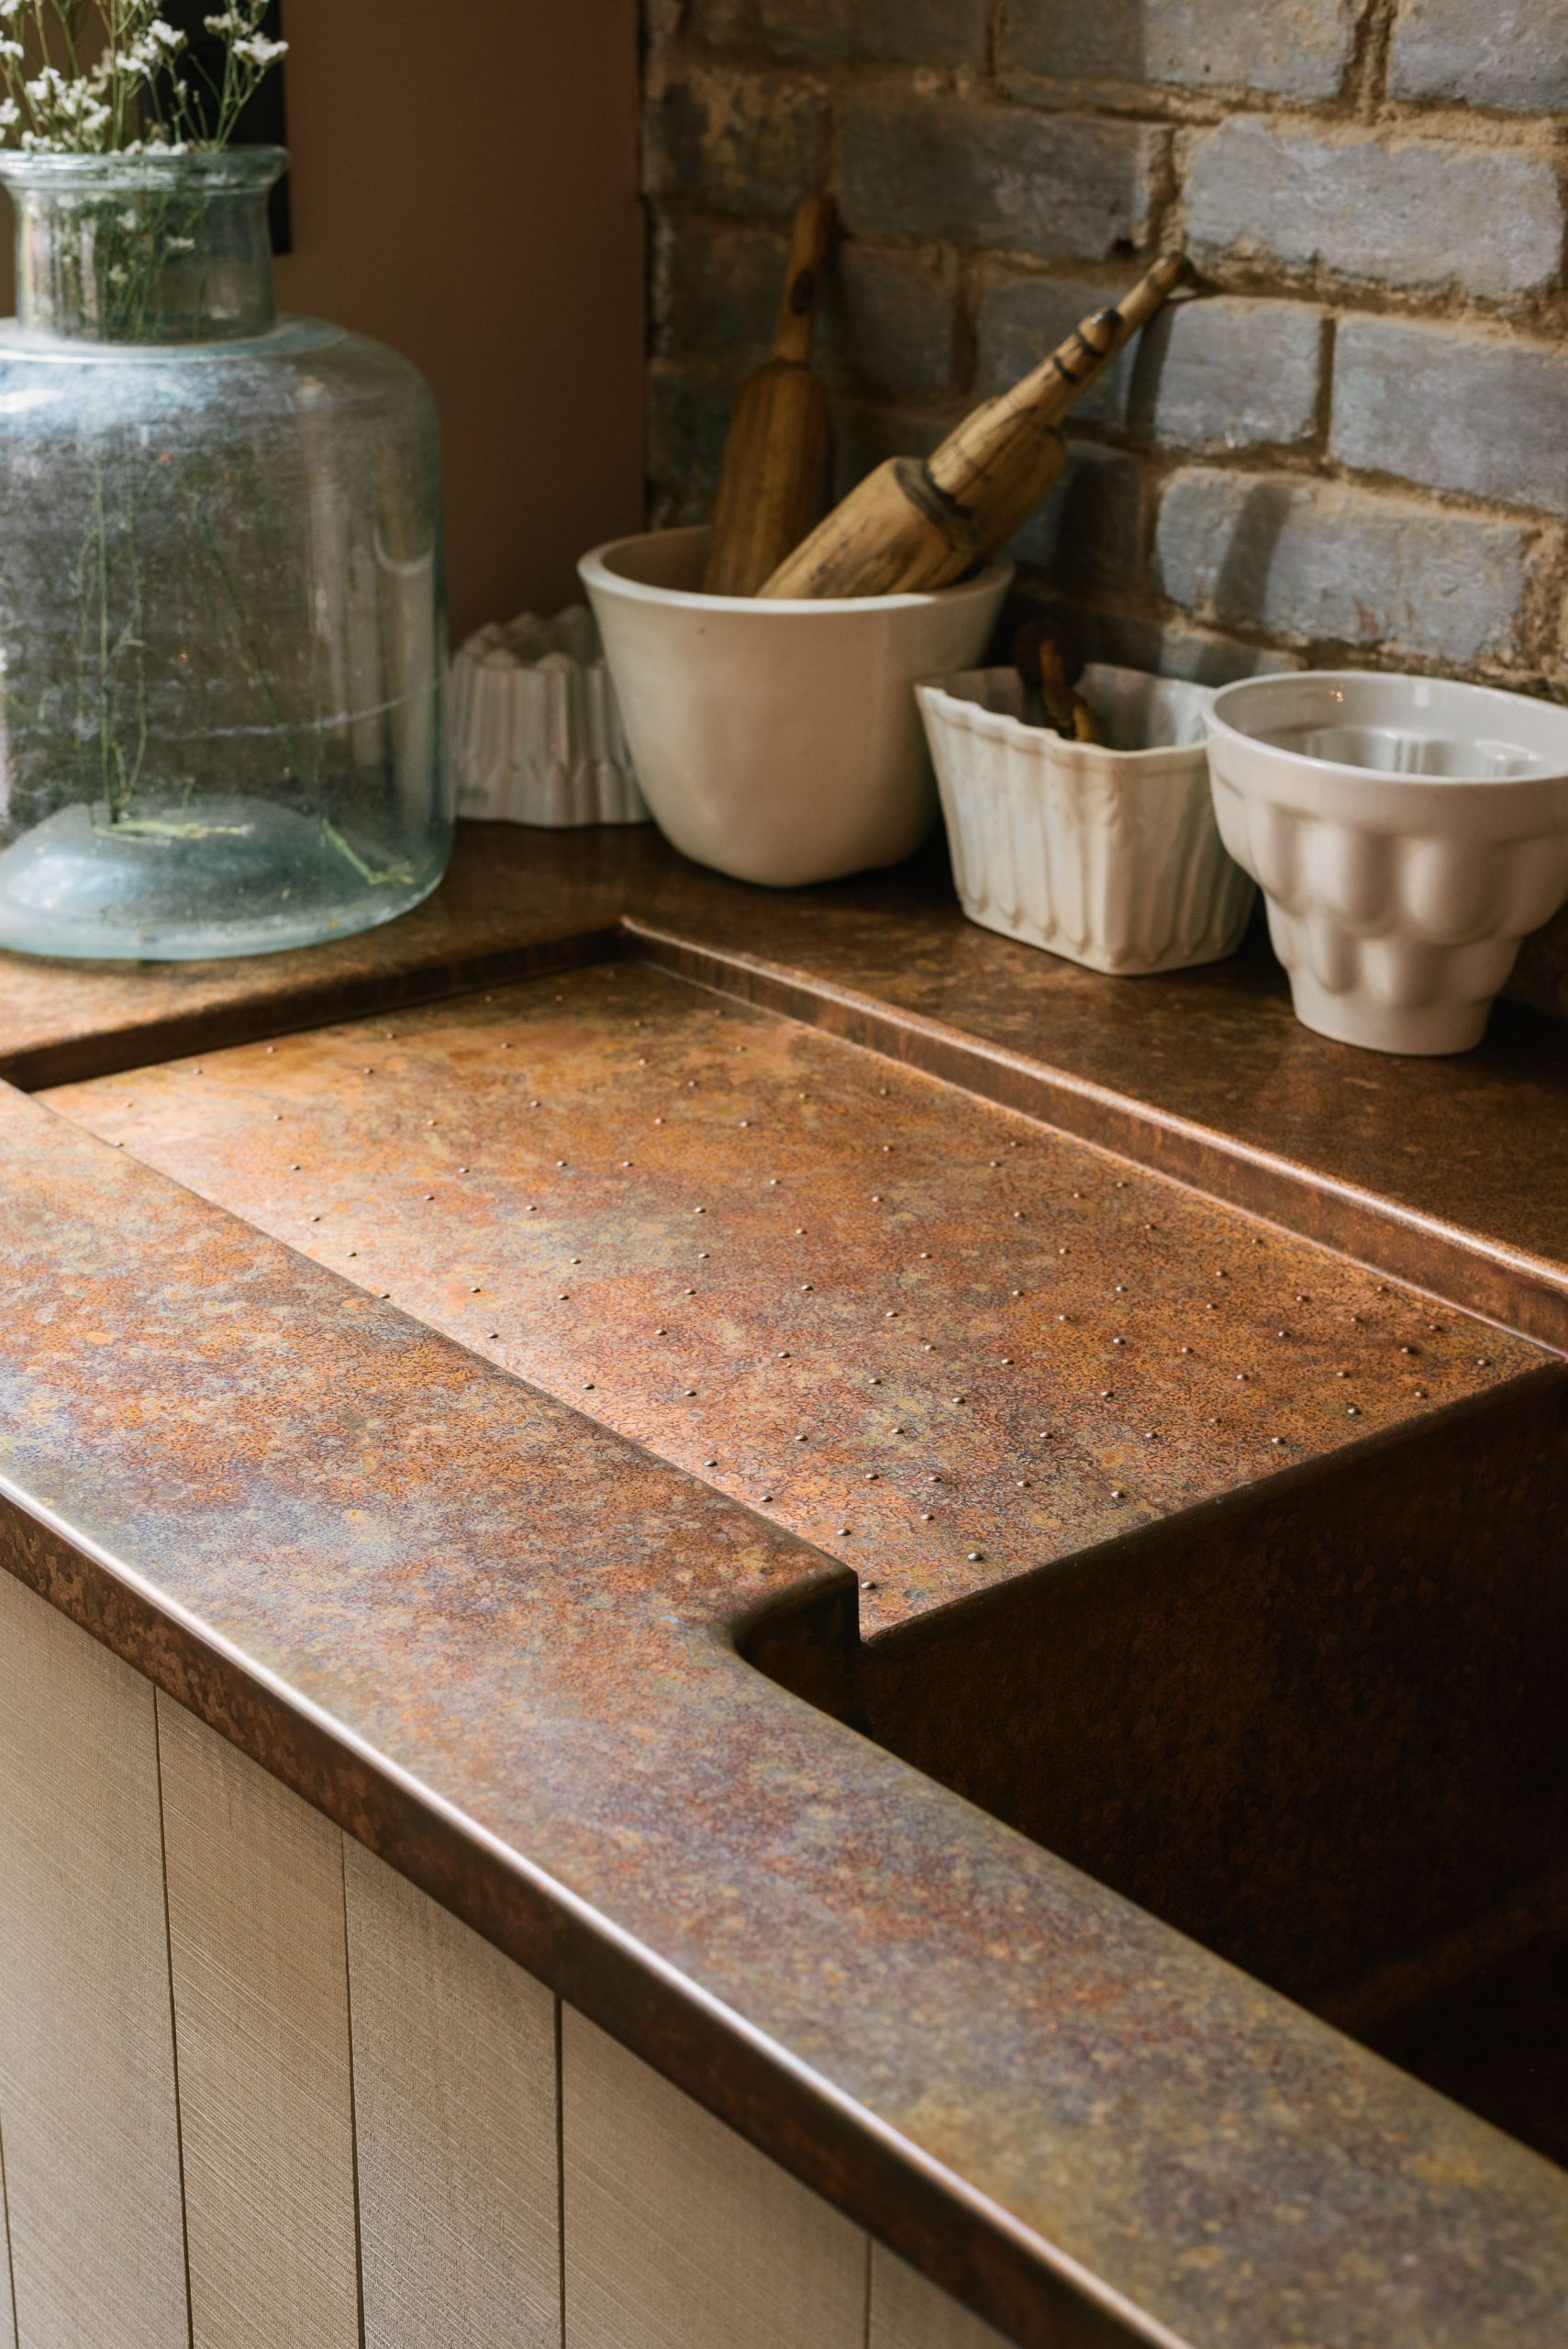 We went for one of our hand-aged copper worktops for the Sebastian Cox Potting S...